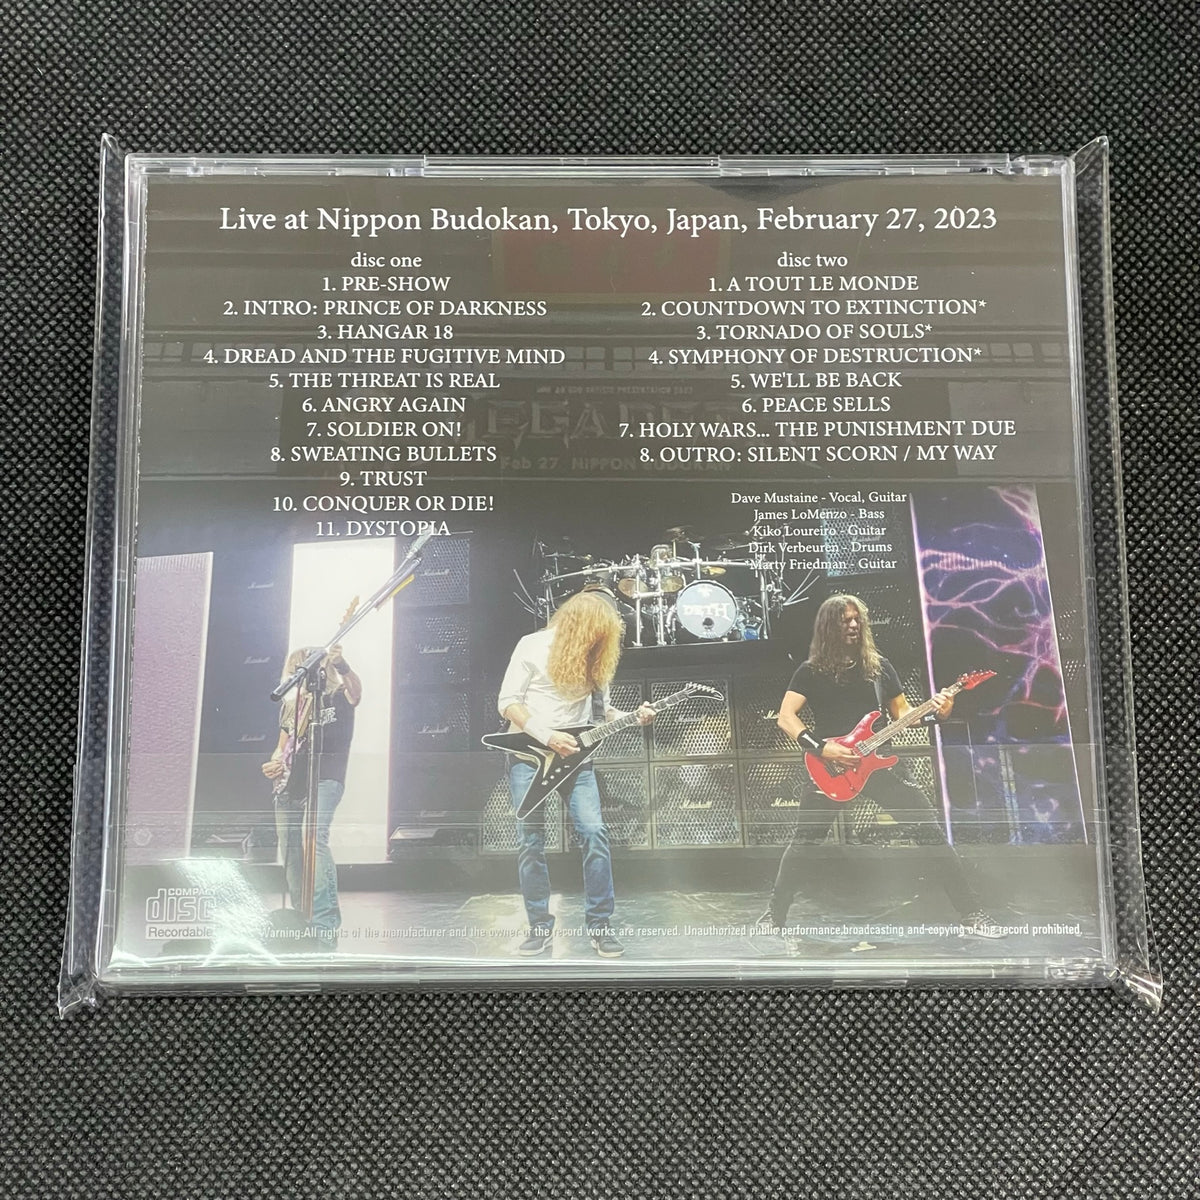 MEGADETH - BUDOKAN 2023 WITH MARTY (2CDR) – Acme Hot Disc